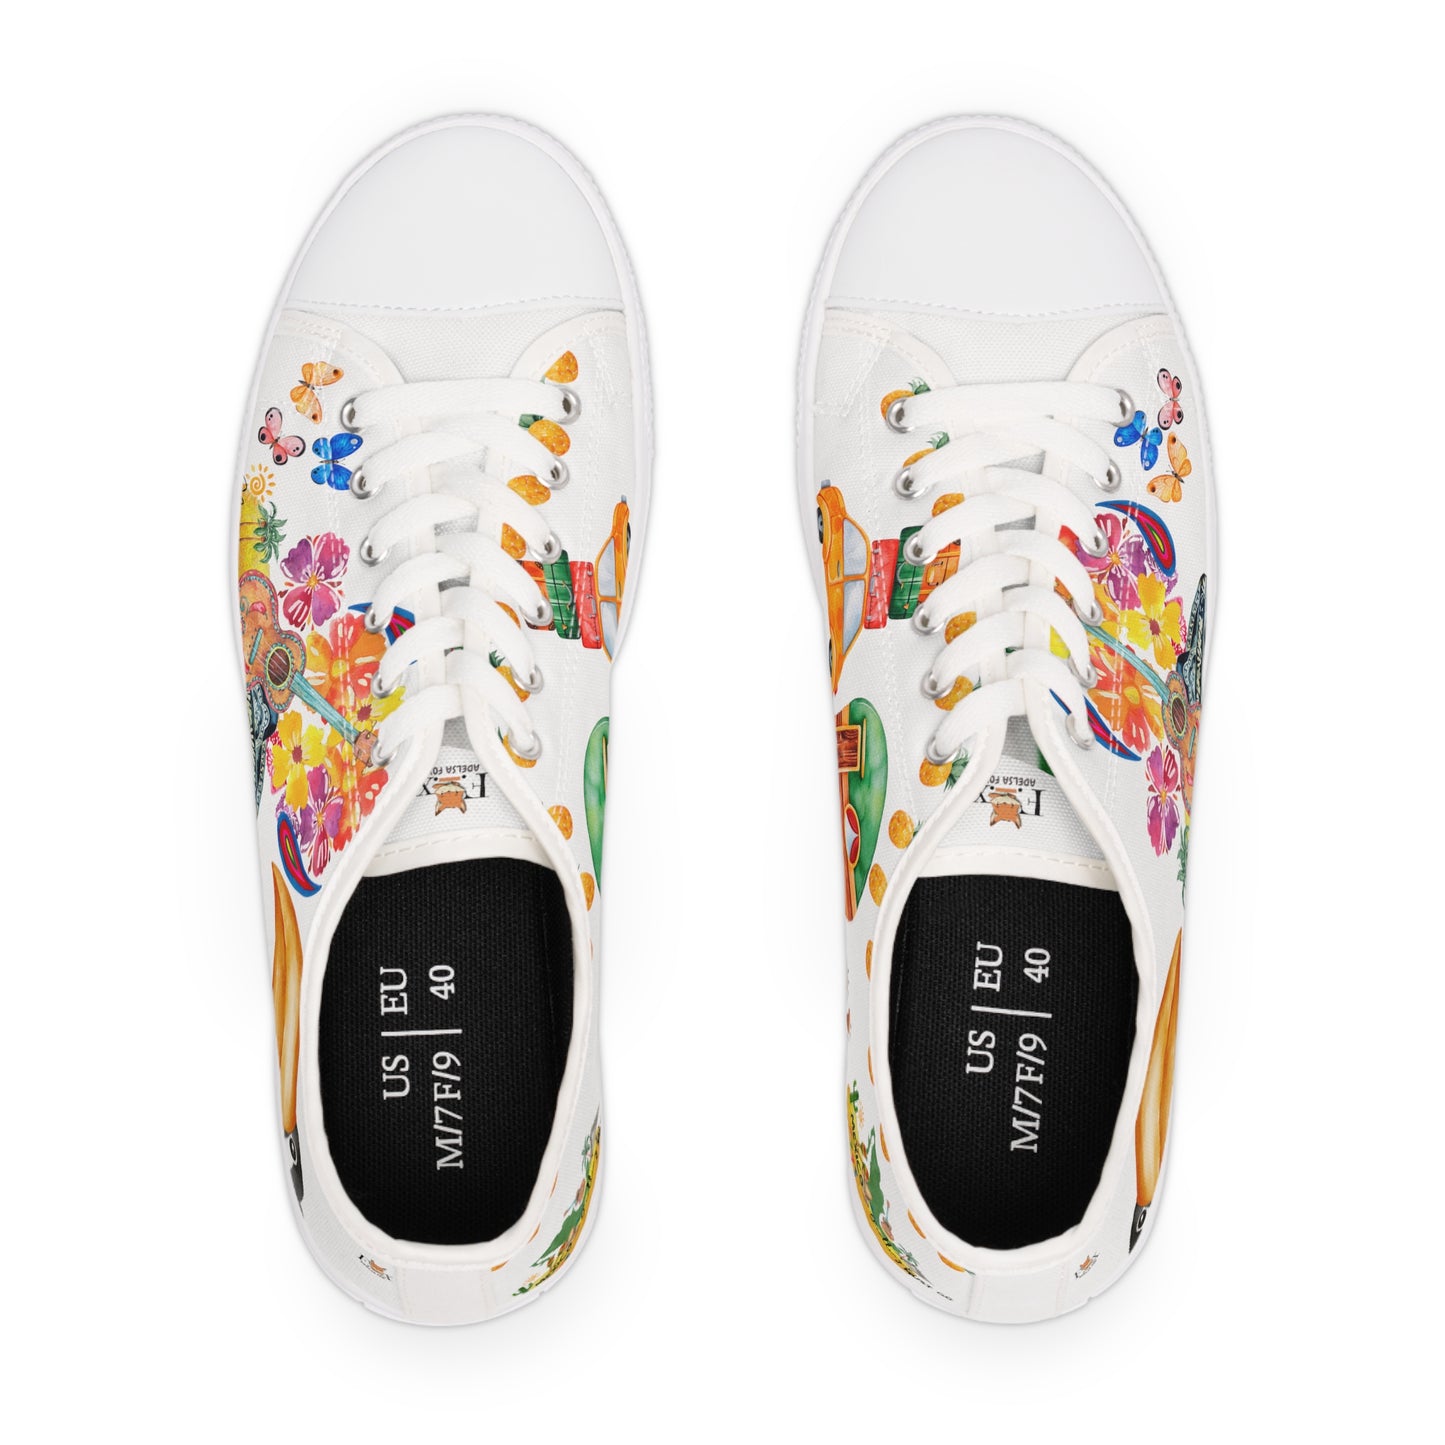 Mexico is calling & i must Go- Travel Edition - White Background Sneakers